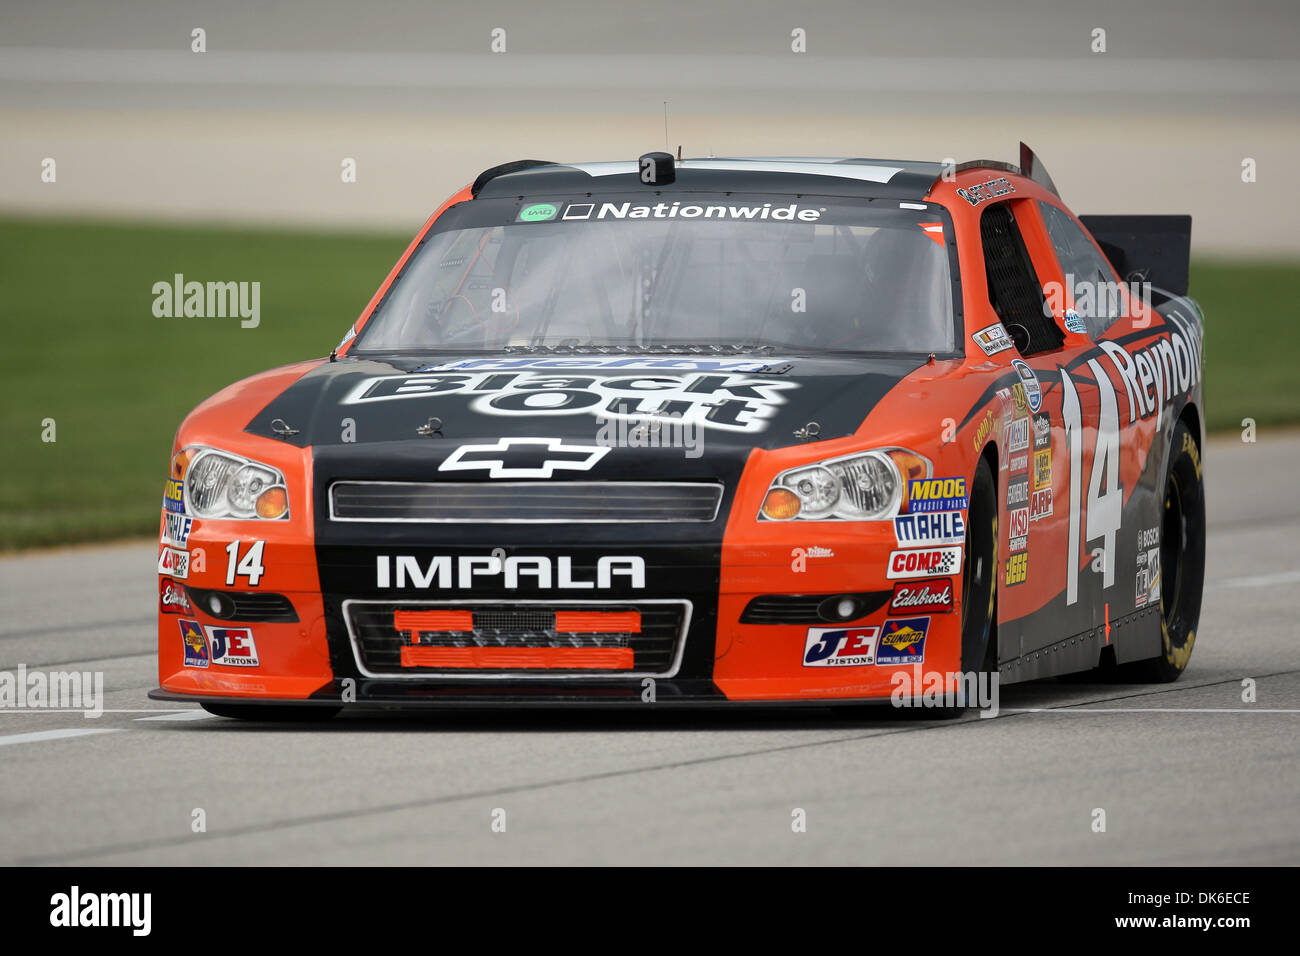 June 4, 2011 - Joliet, Illinois, U.S - Nationwide Series driver Eric McClure (14) during the STP 300 at Chicagoland Speedway in Joliet, Illinois. (Credit Image: © Chris Proctor/Southcreek Global/ZUMAPRESS.com) Stock Photo